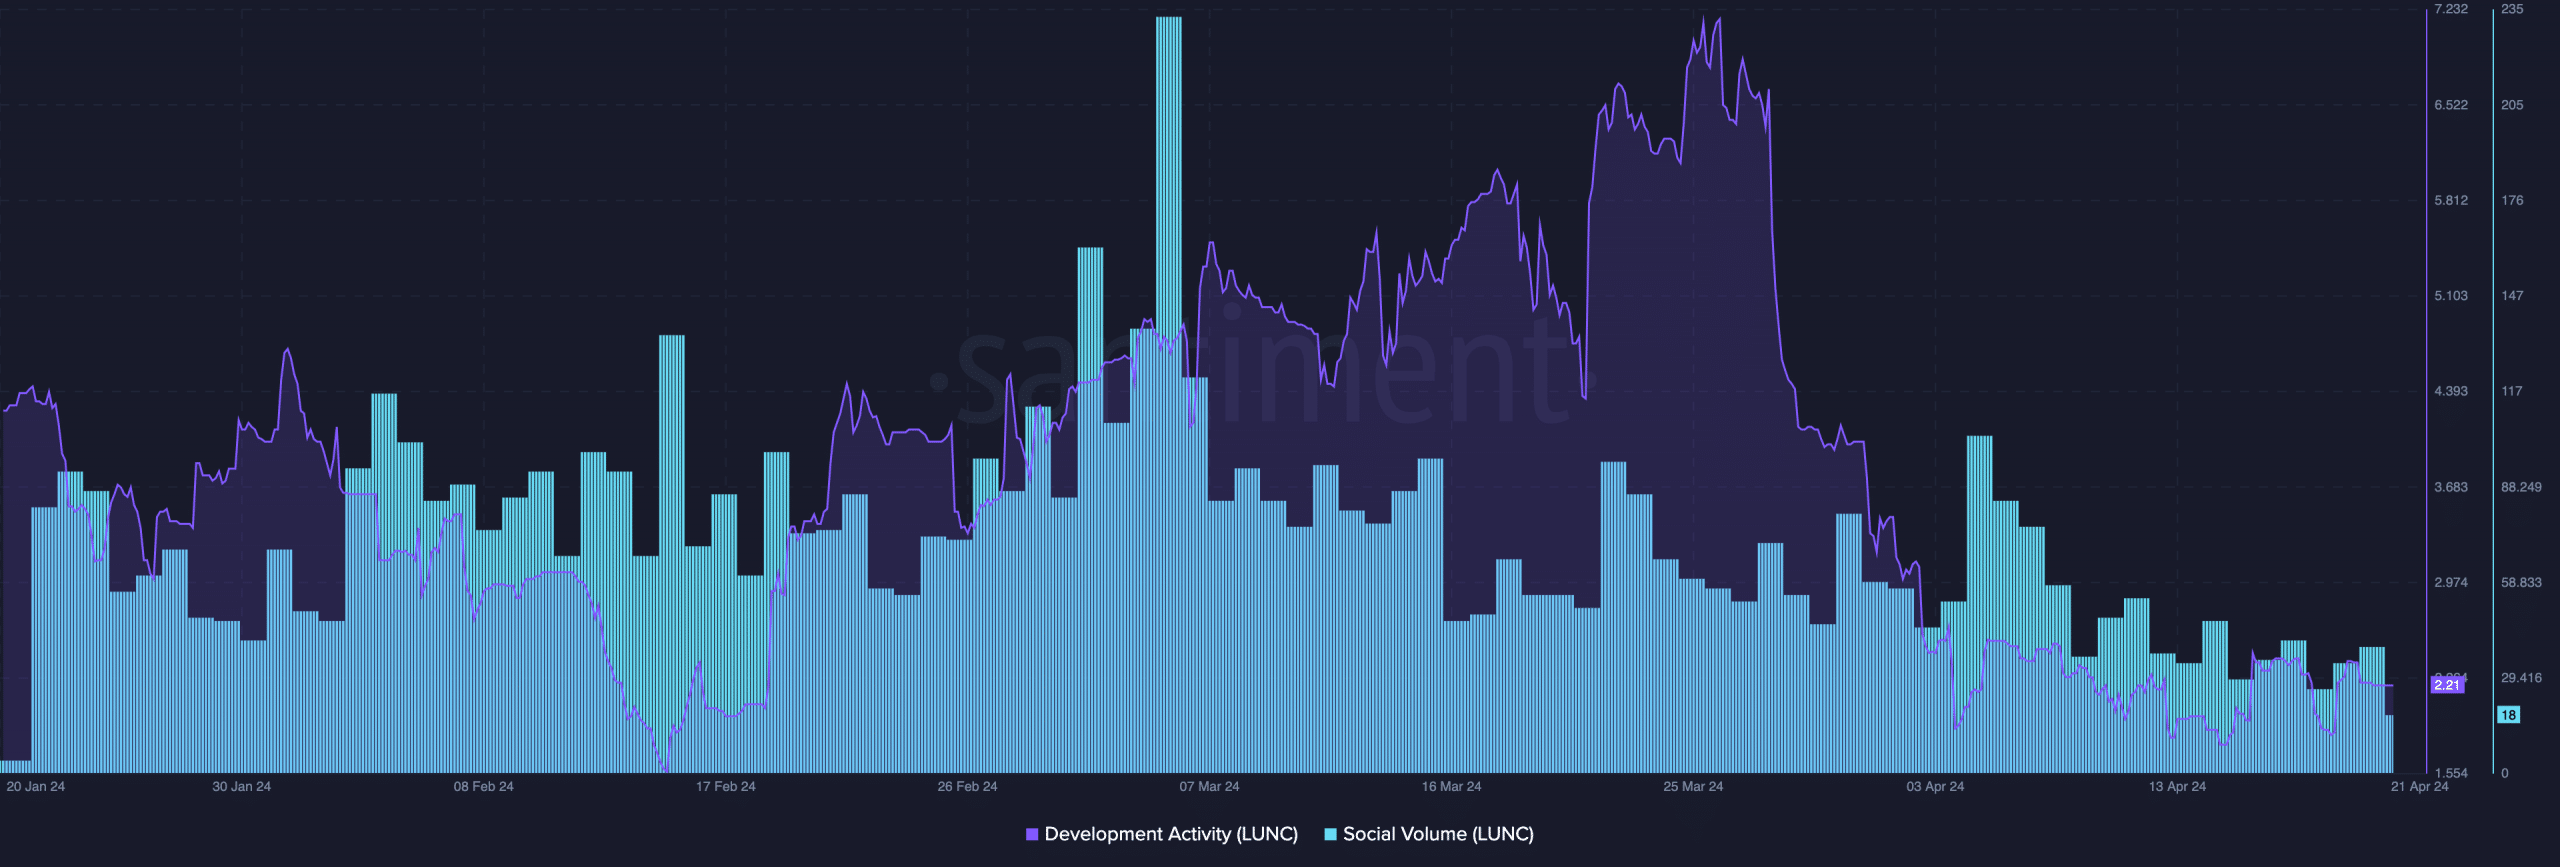 LUNC's falling development activity and social volume